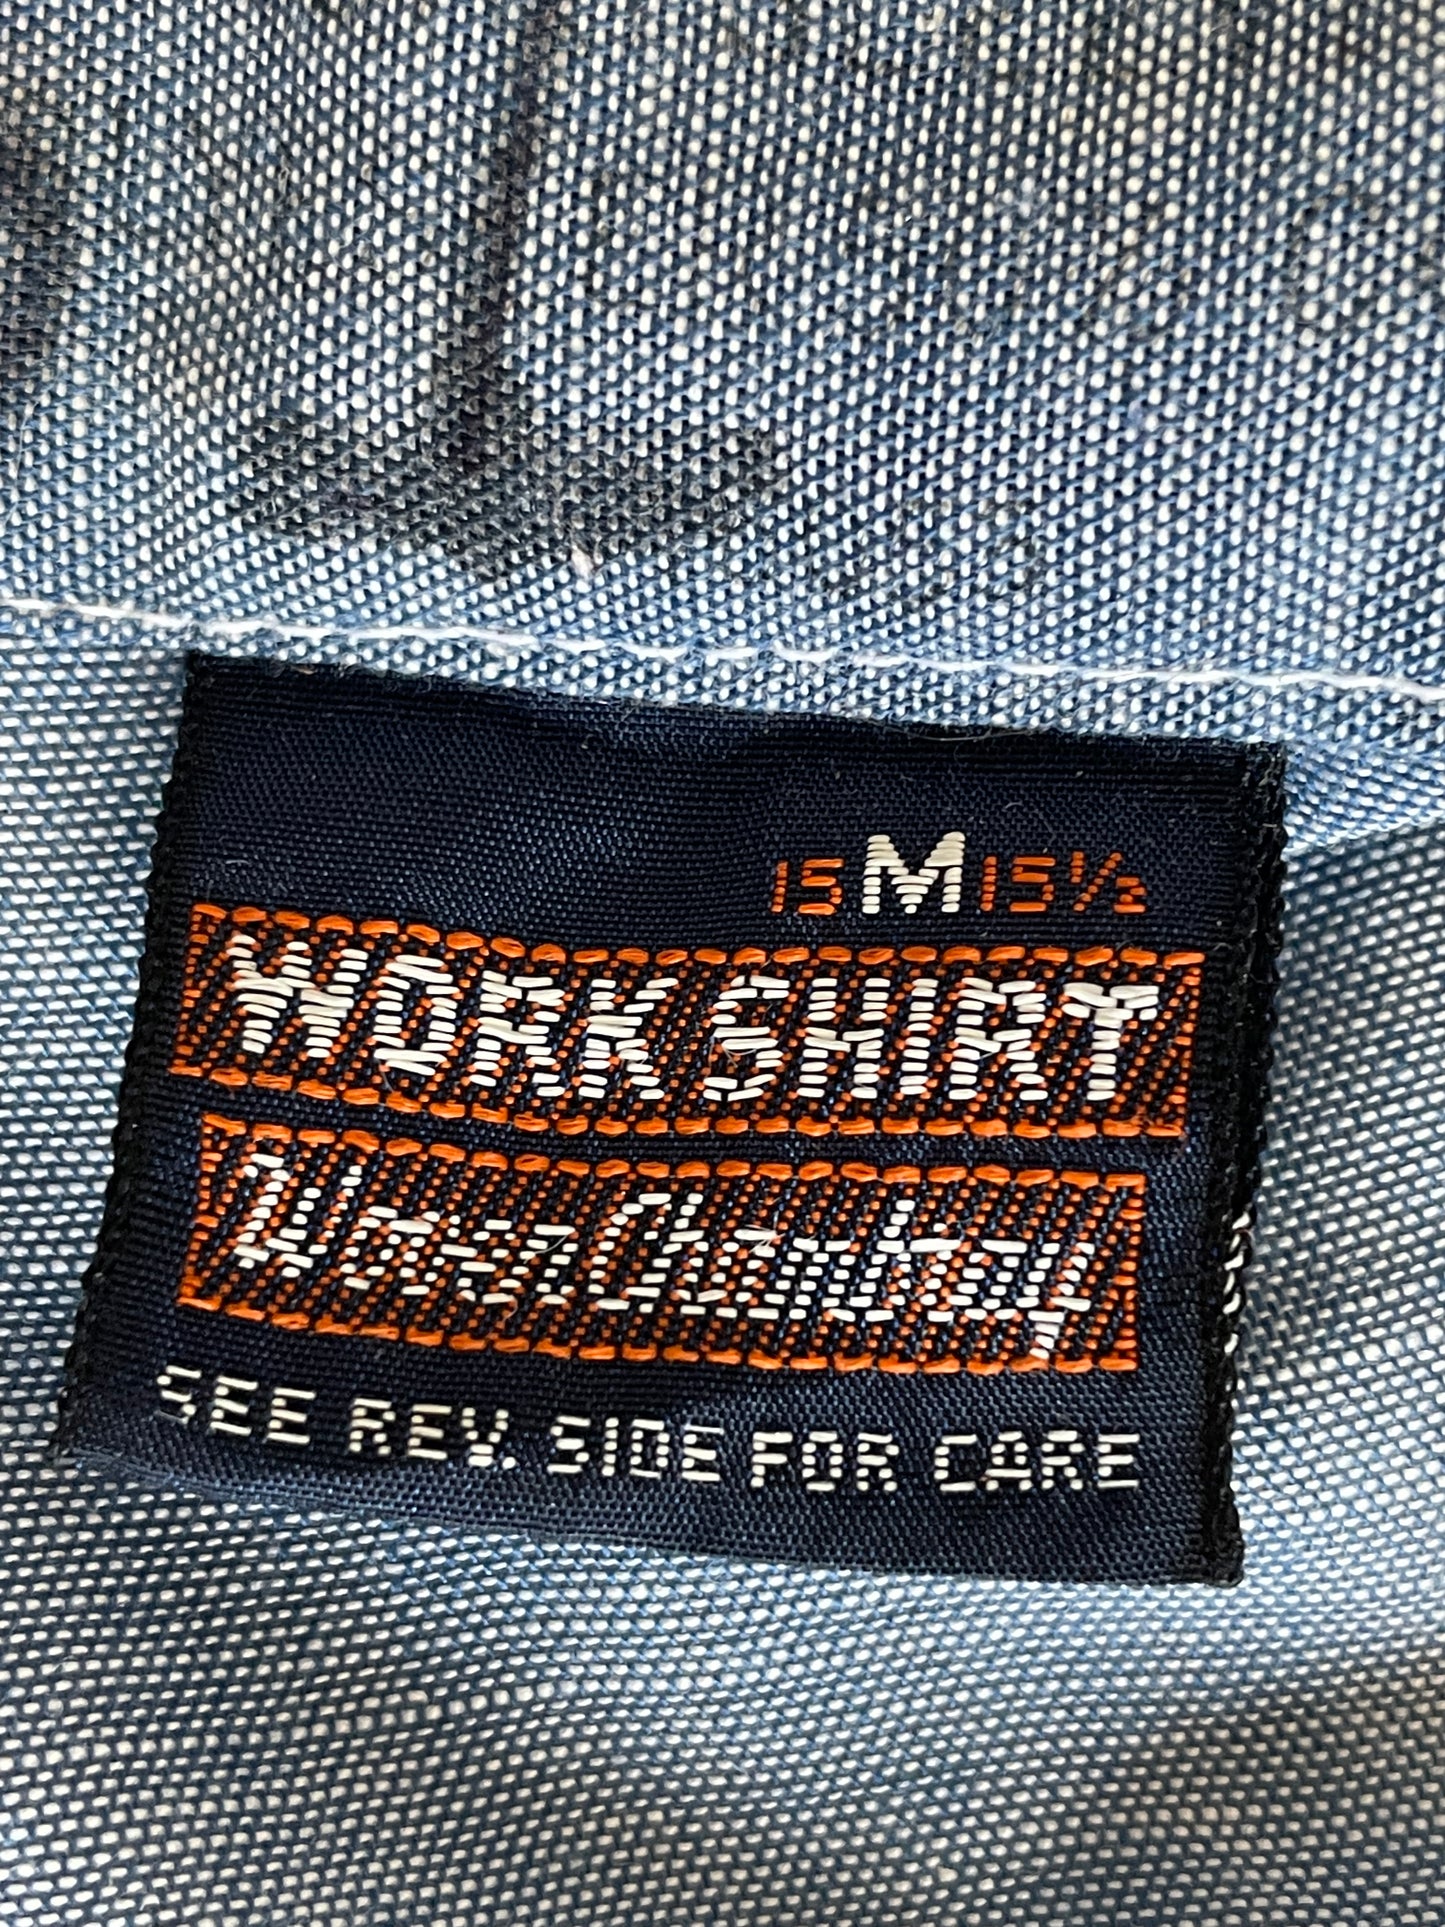 80s Chambray Button Down Work Shirt